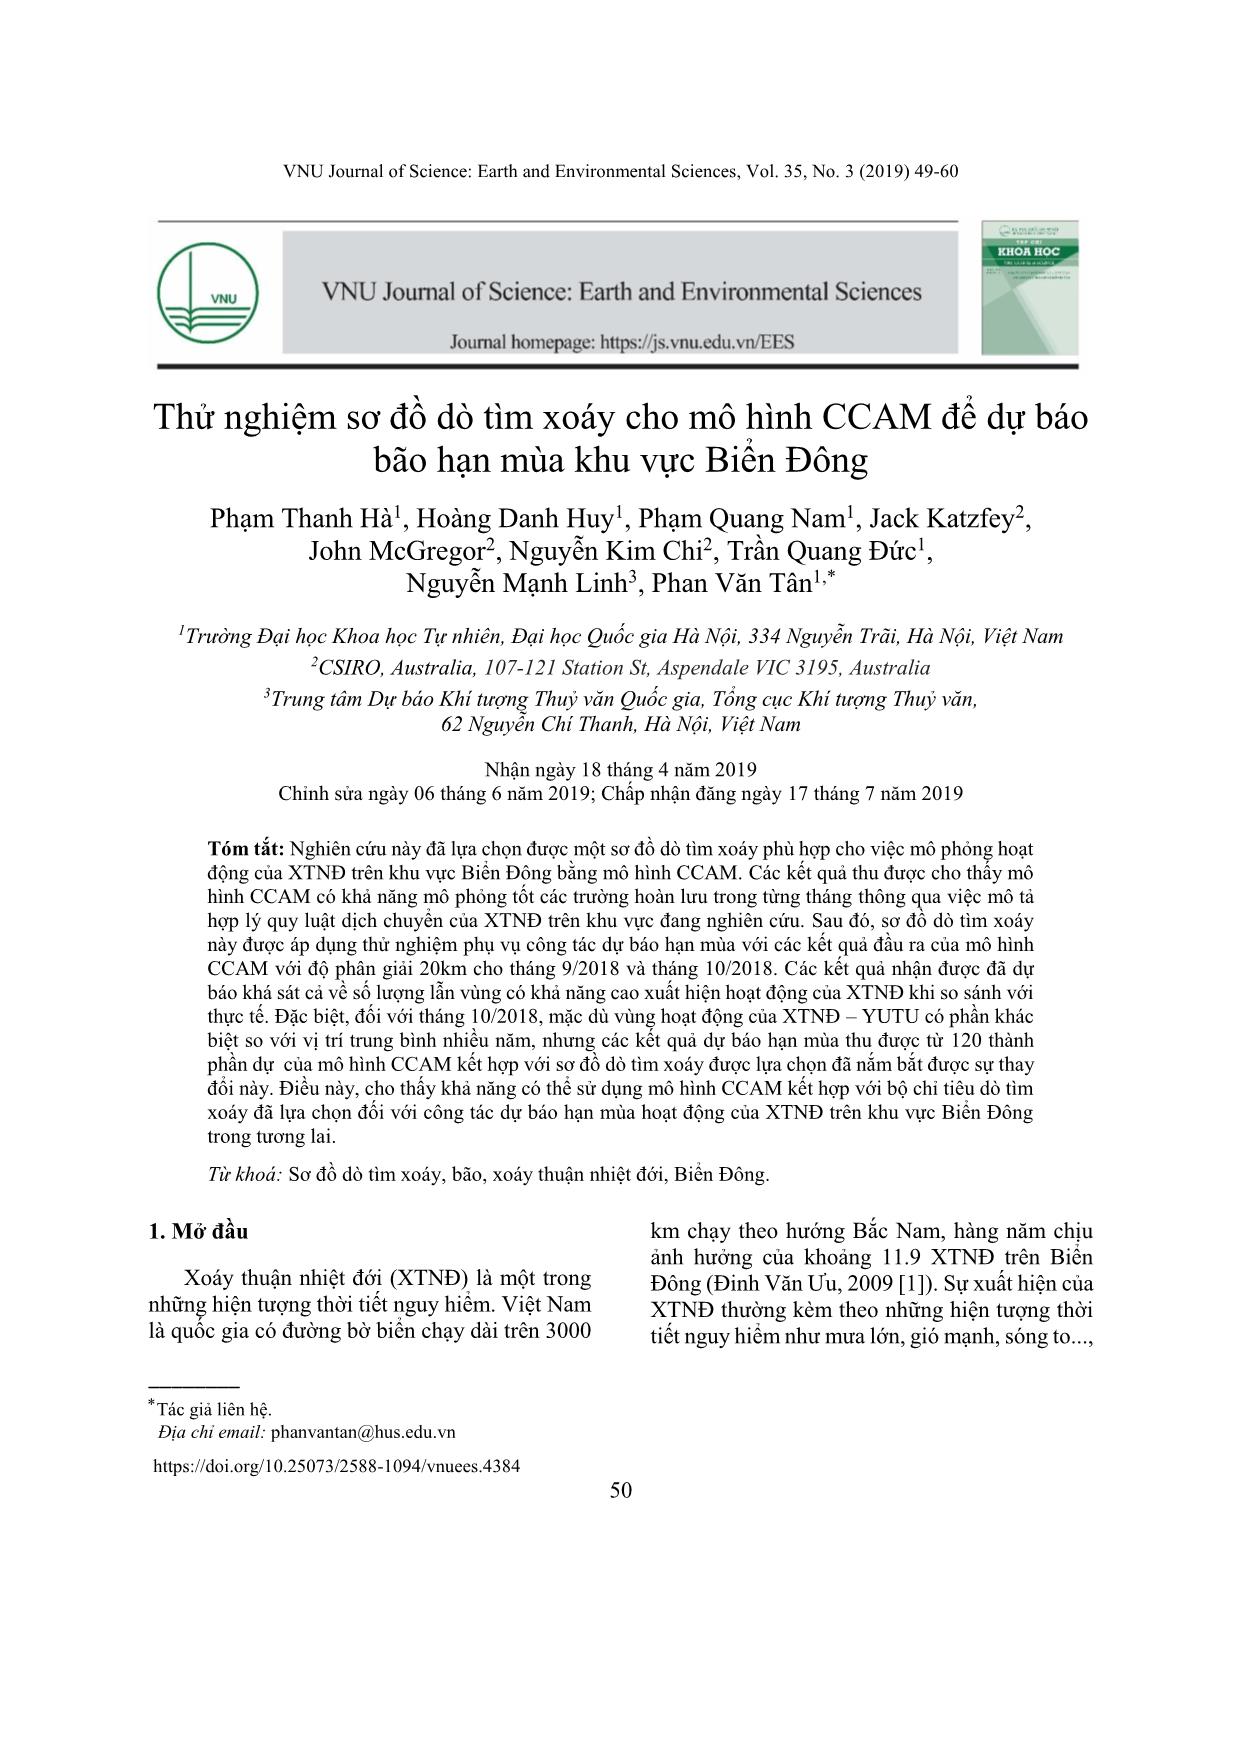 Implementation of Tropical Cyclone Detection Scheme to CCAM Model for Seasonal Tropical Cyclone Prediction over the Vietnam East Sea trang 2